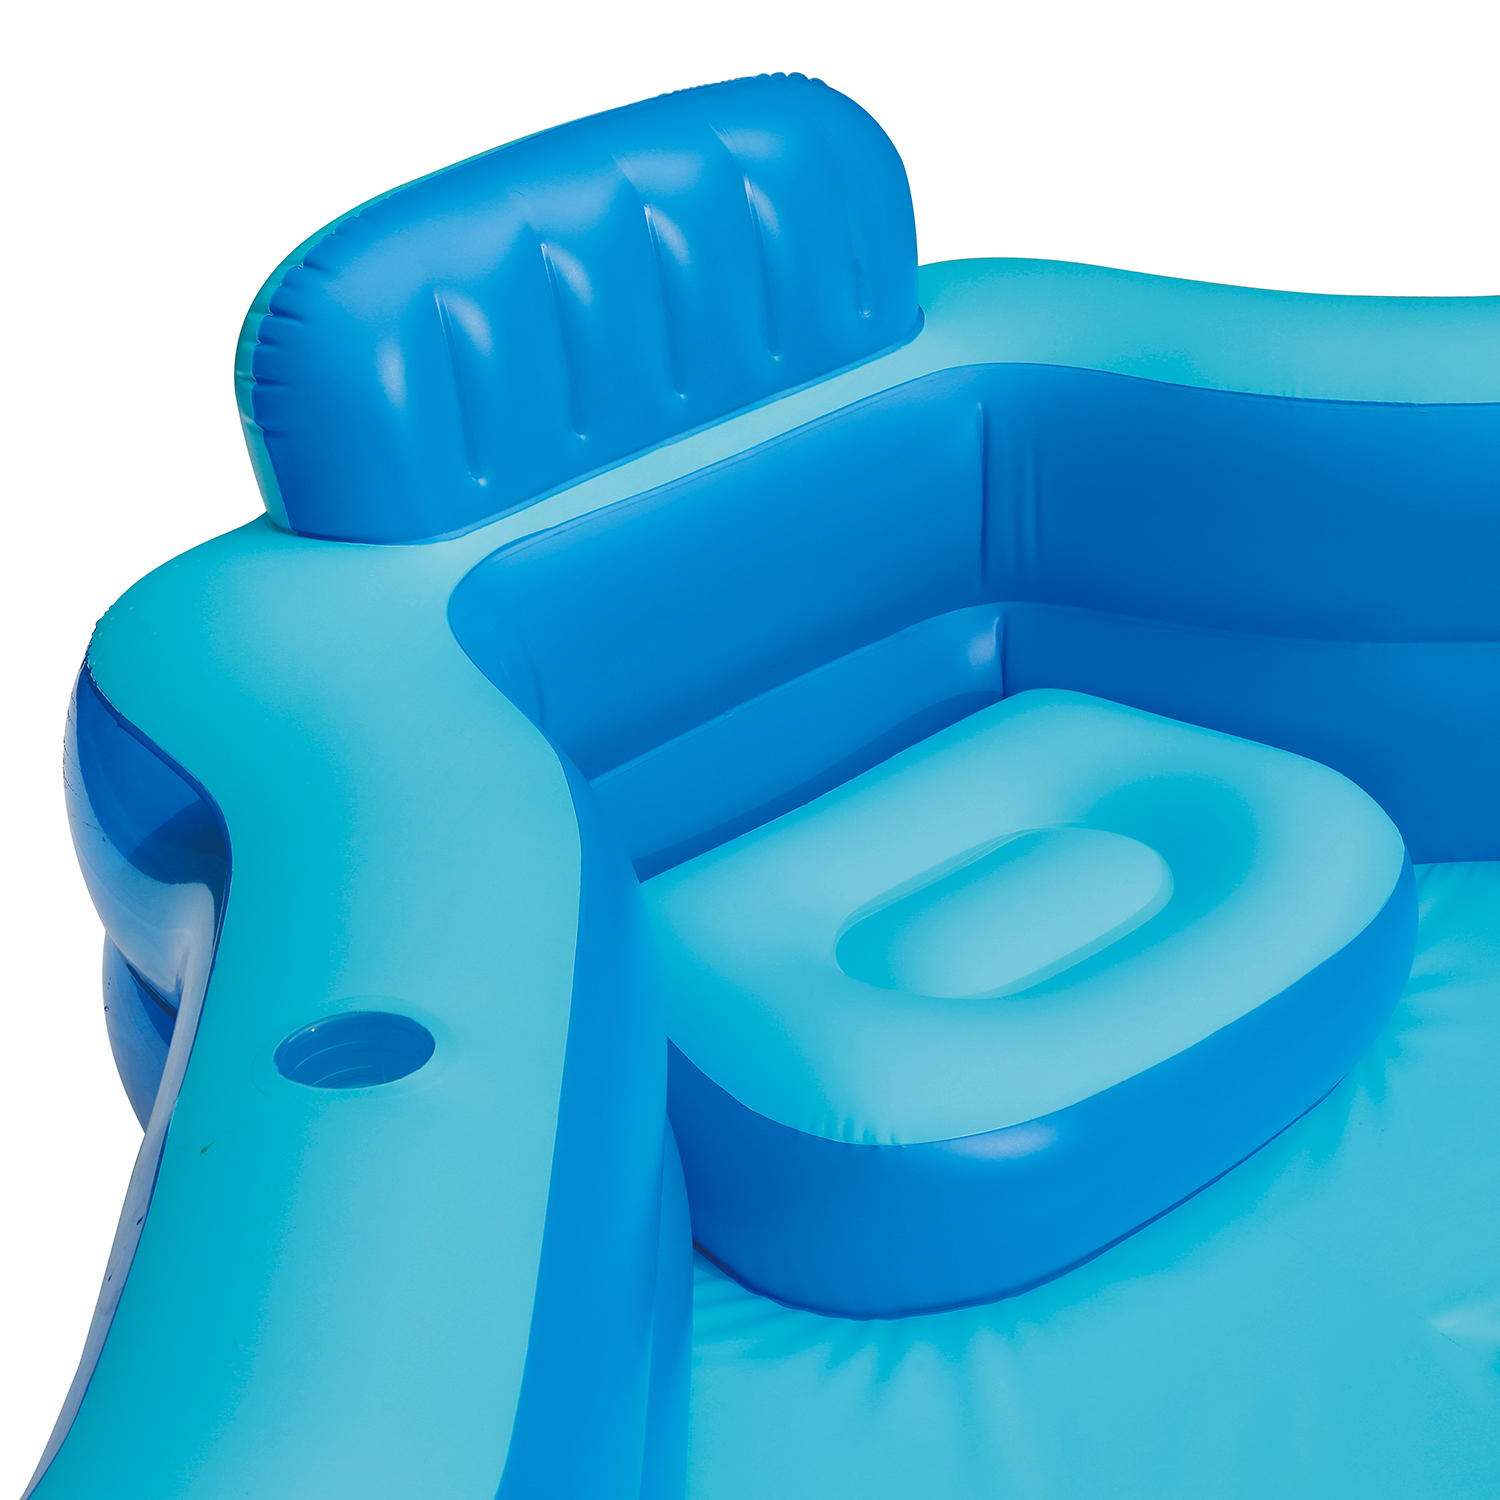 Inflatable Lounge Chair Pool - Blow-up pool with 4 built-in lounge chairs